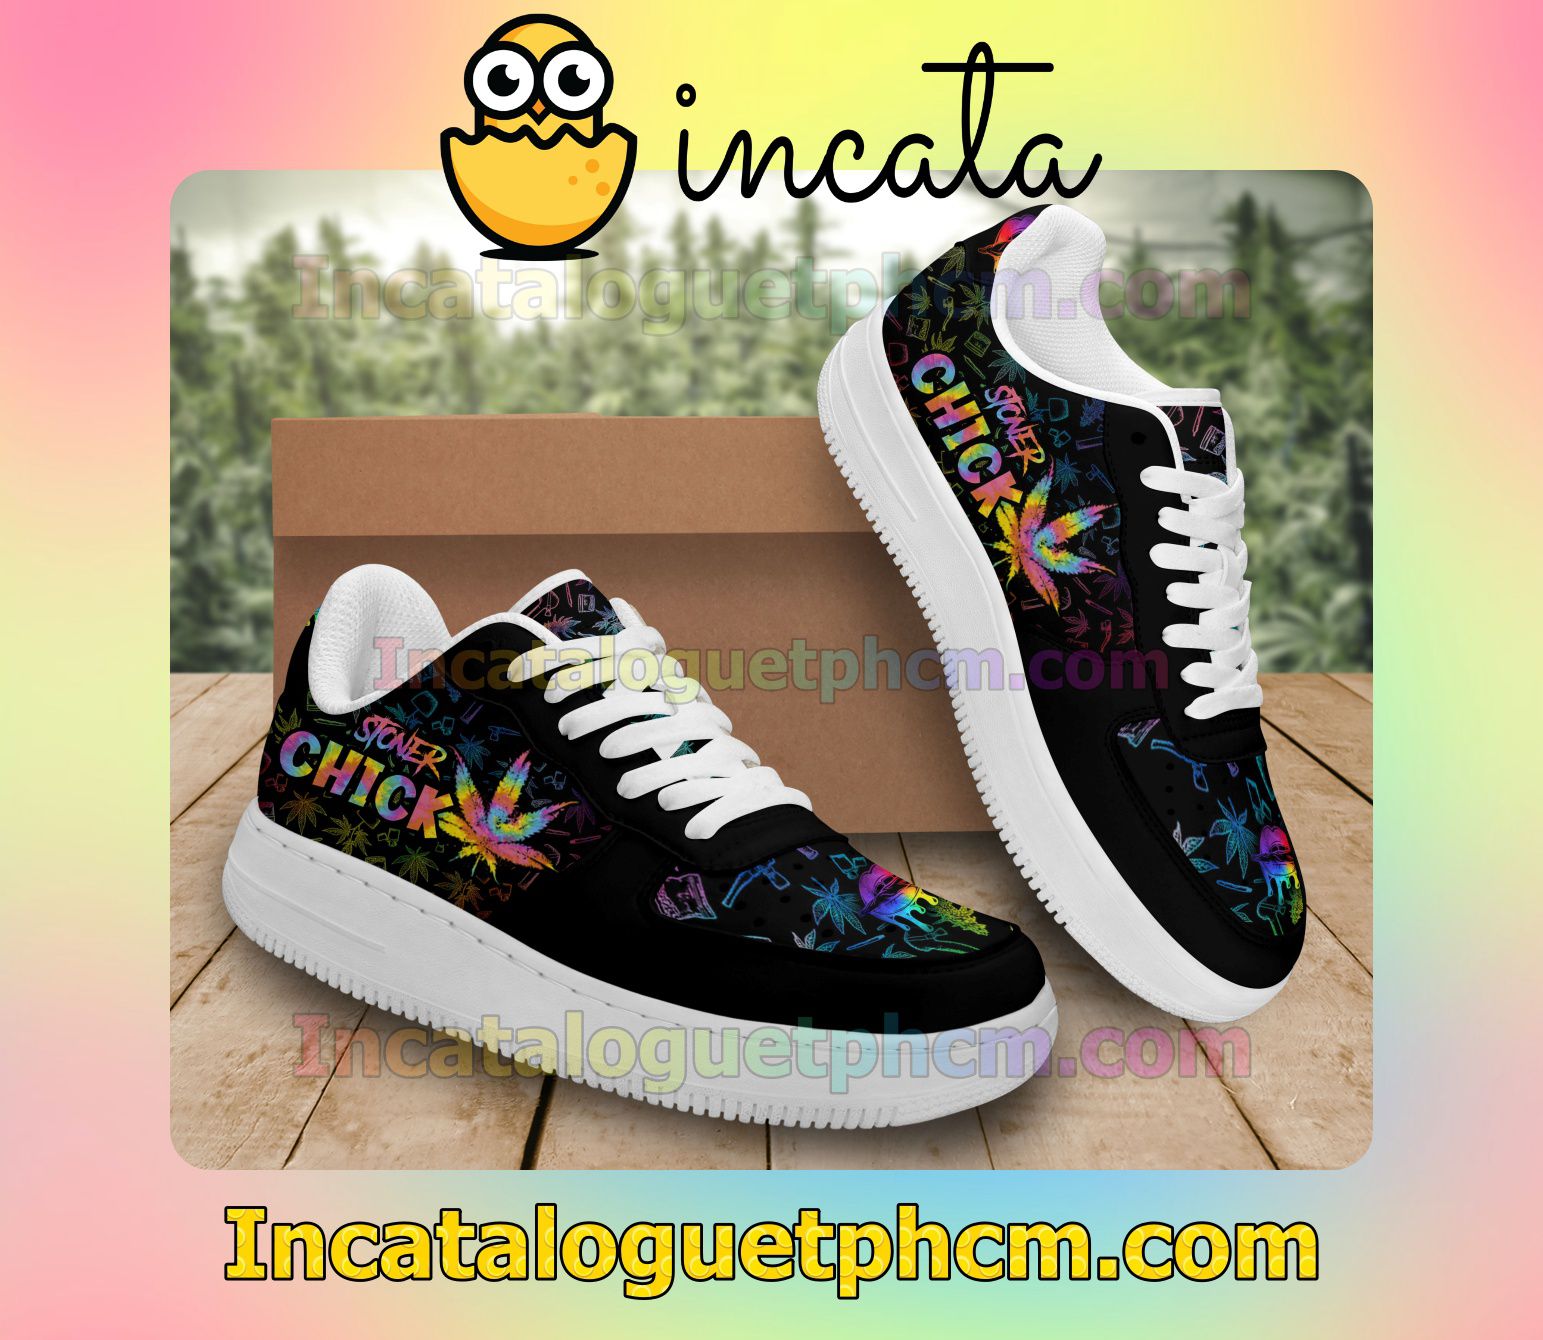 Very Good Quality Stoner Chick Colorful Cannabis Weed Nike Shoes Sneakers